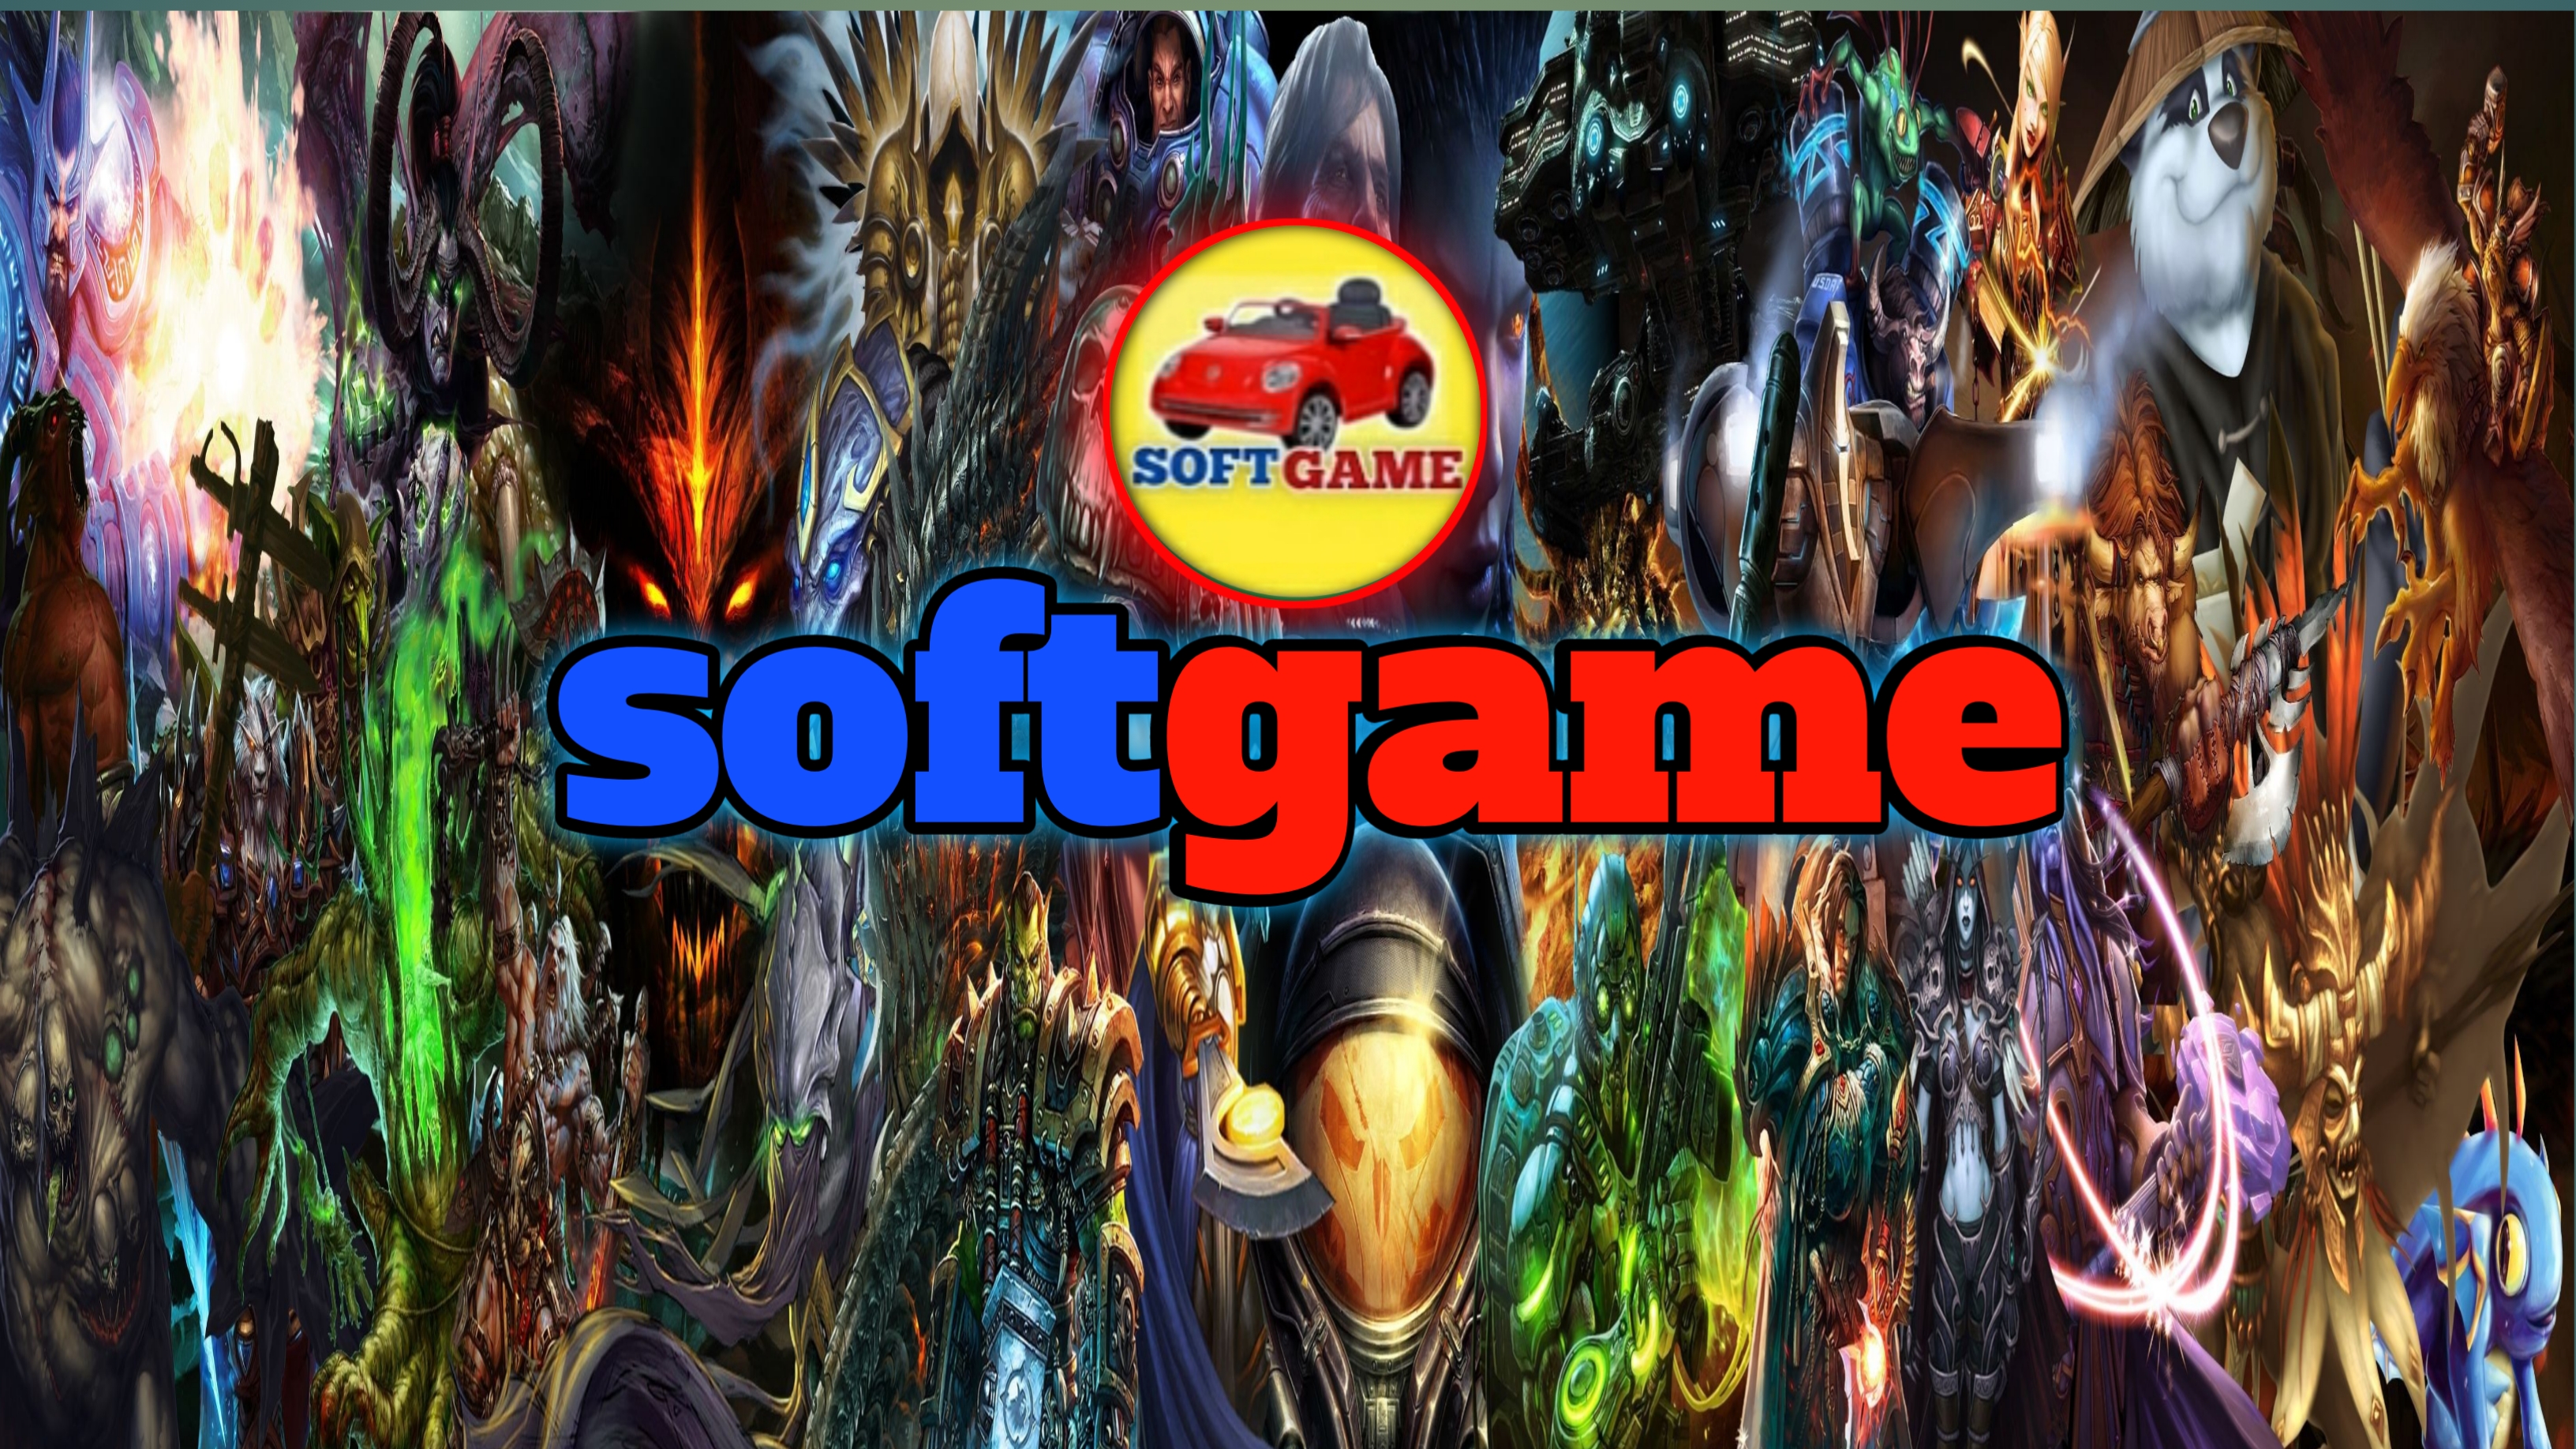 Softgame